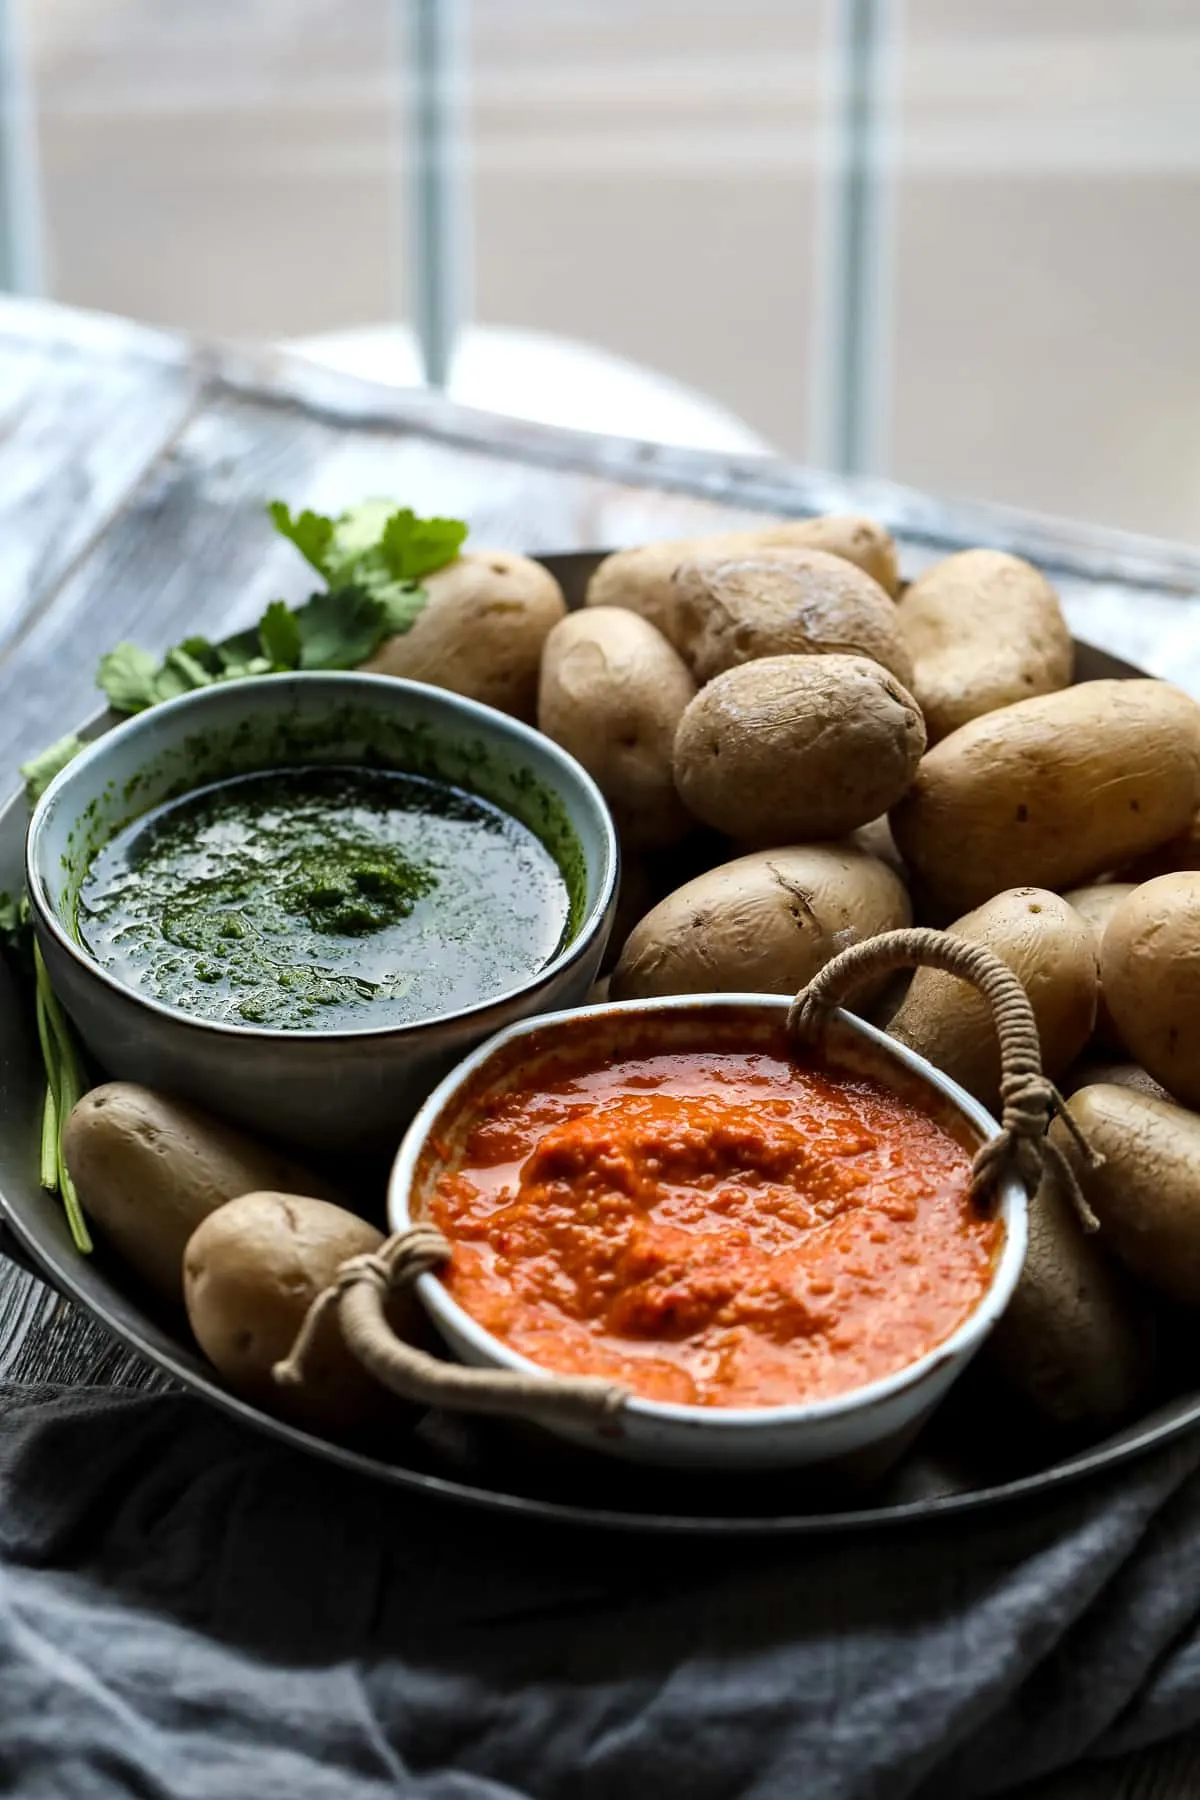 Canarian potatoes with mojo sauces.